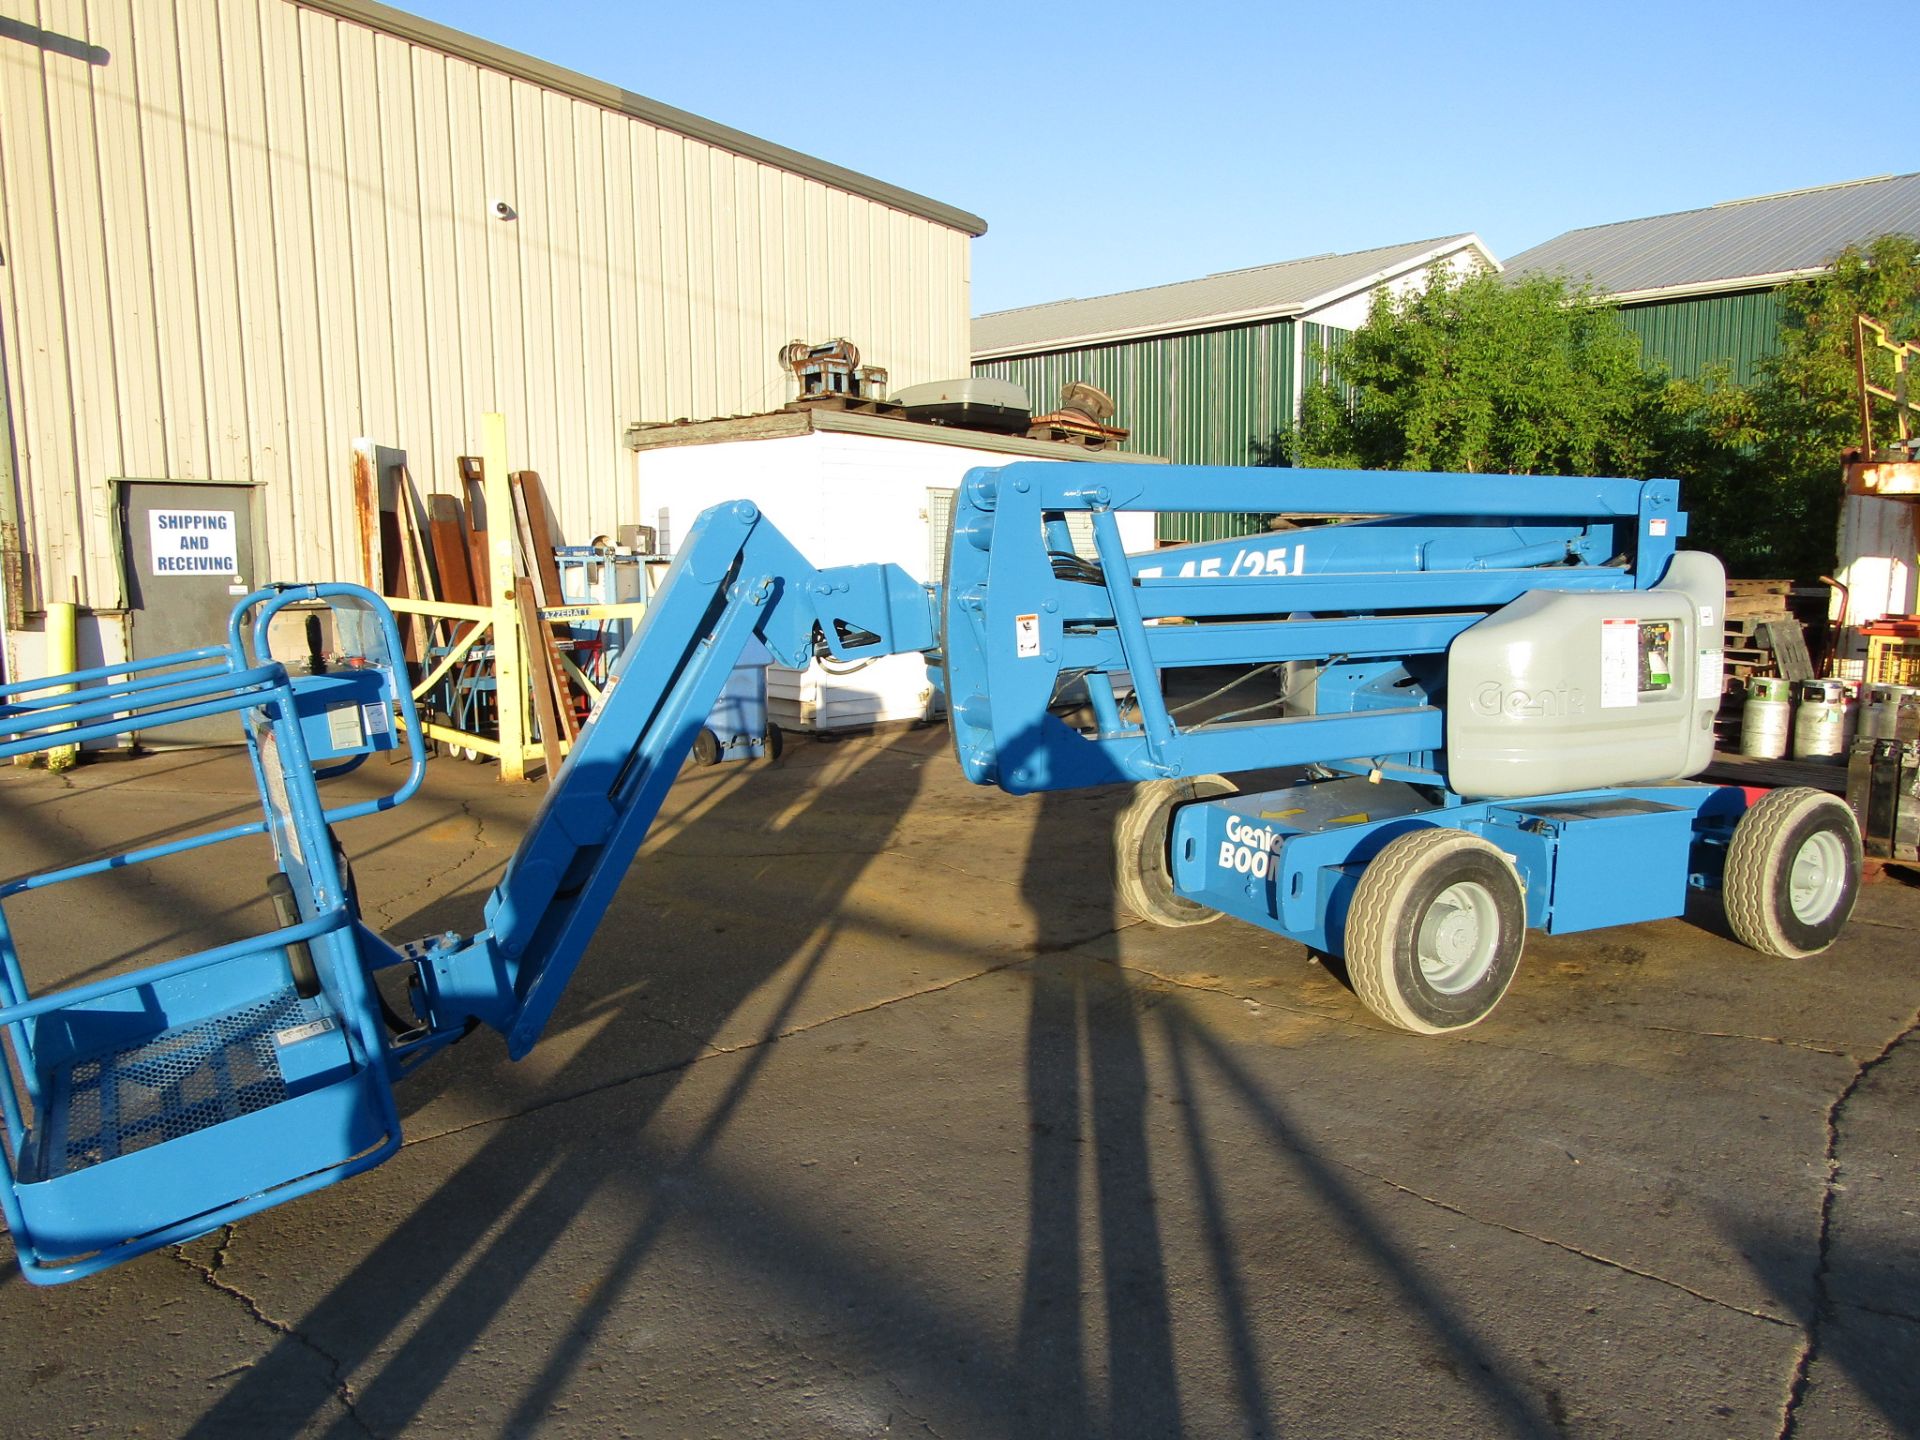 FREE CUSTOMS DOCS & 0 DUTY FEES - MINT Genie Zoom Boom Articulating Lift model Z-45/25J 45' height - Image 2 of 4